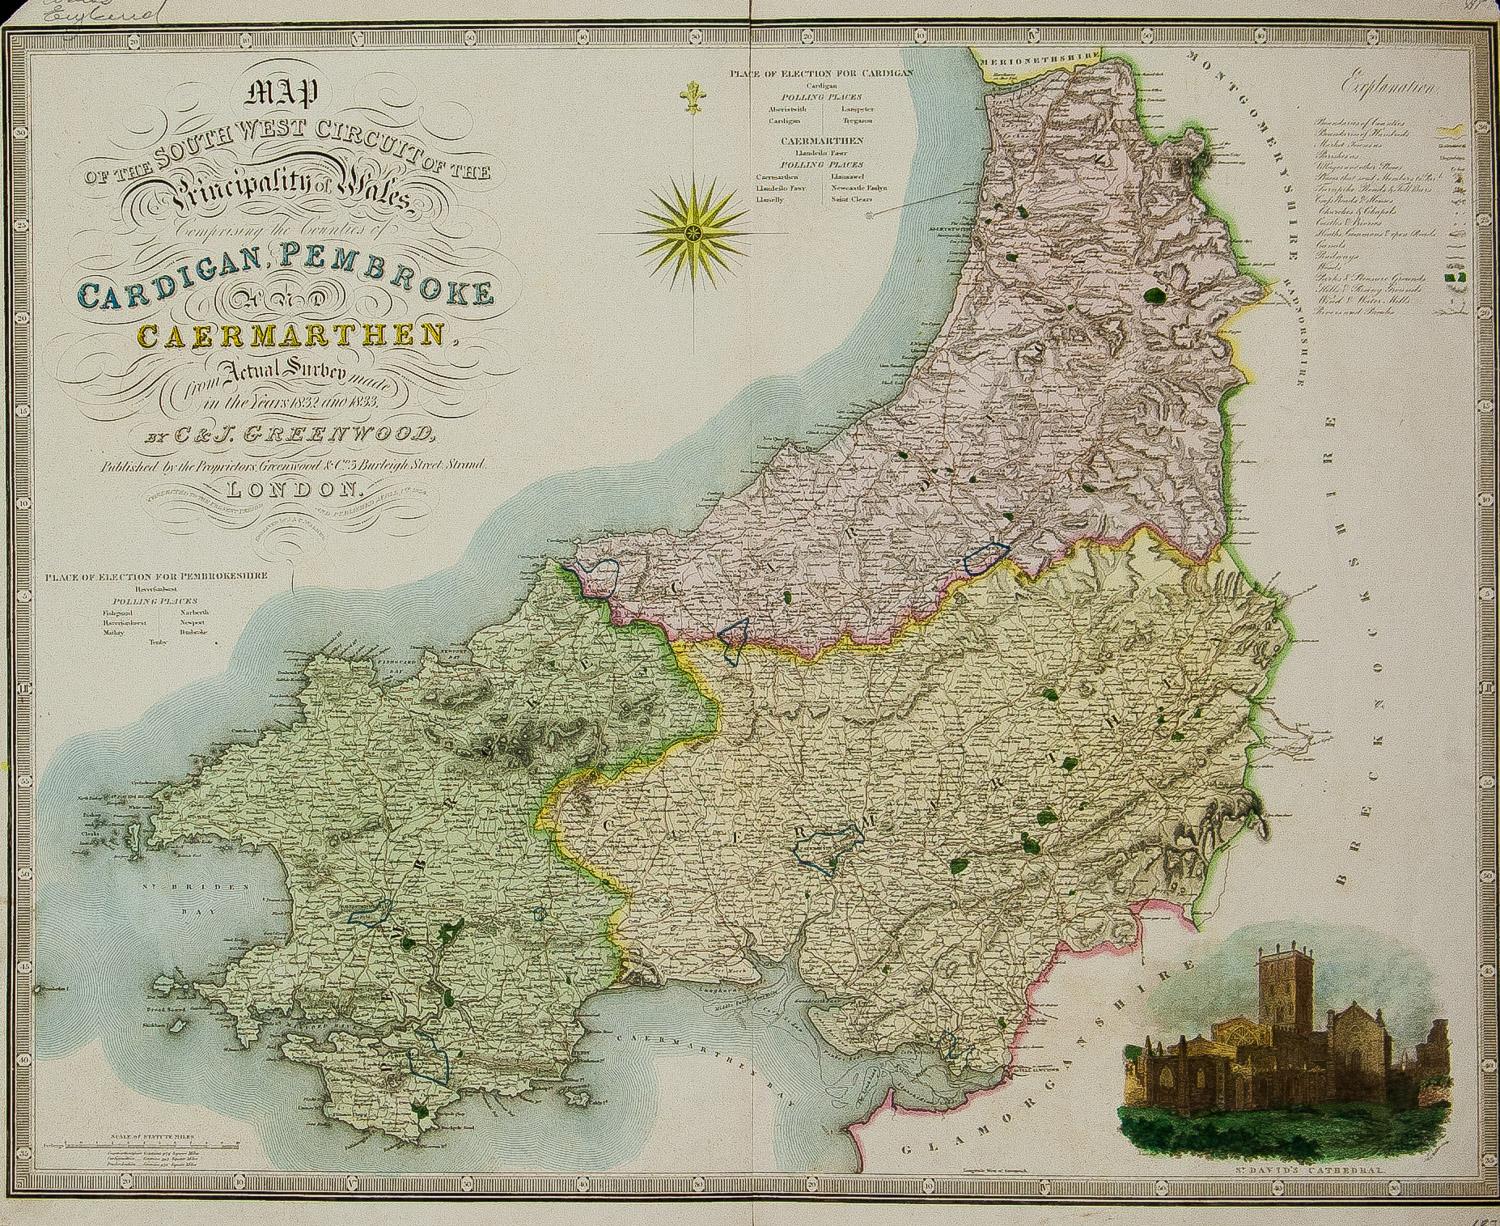 Christopher & John Greenwood Print - Map of Cardigan Pembroke & Caermarthen from an Actual Survey made in 1817